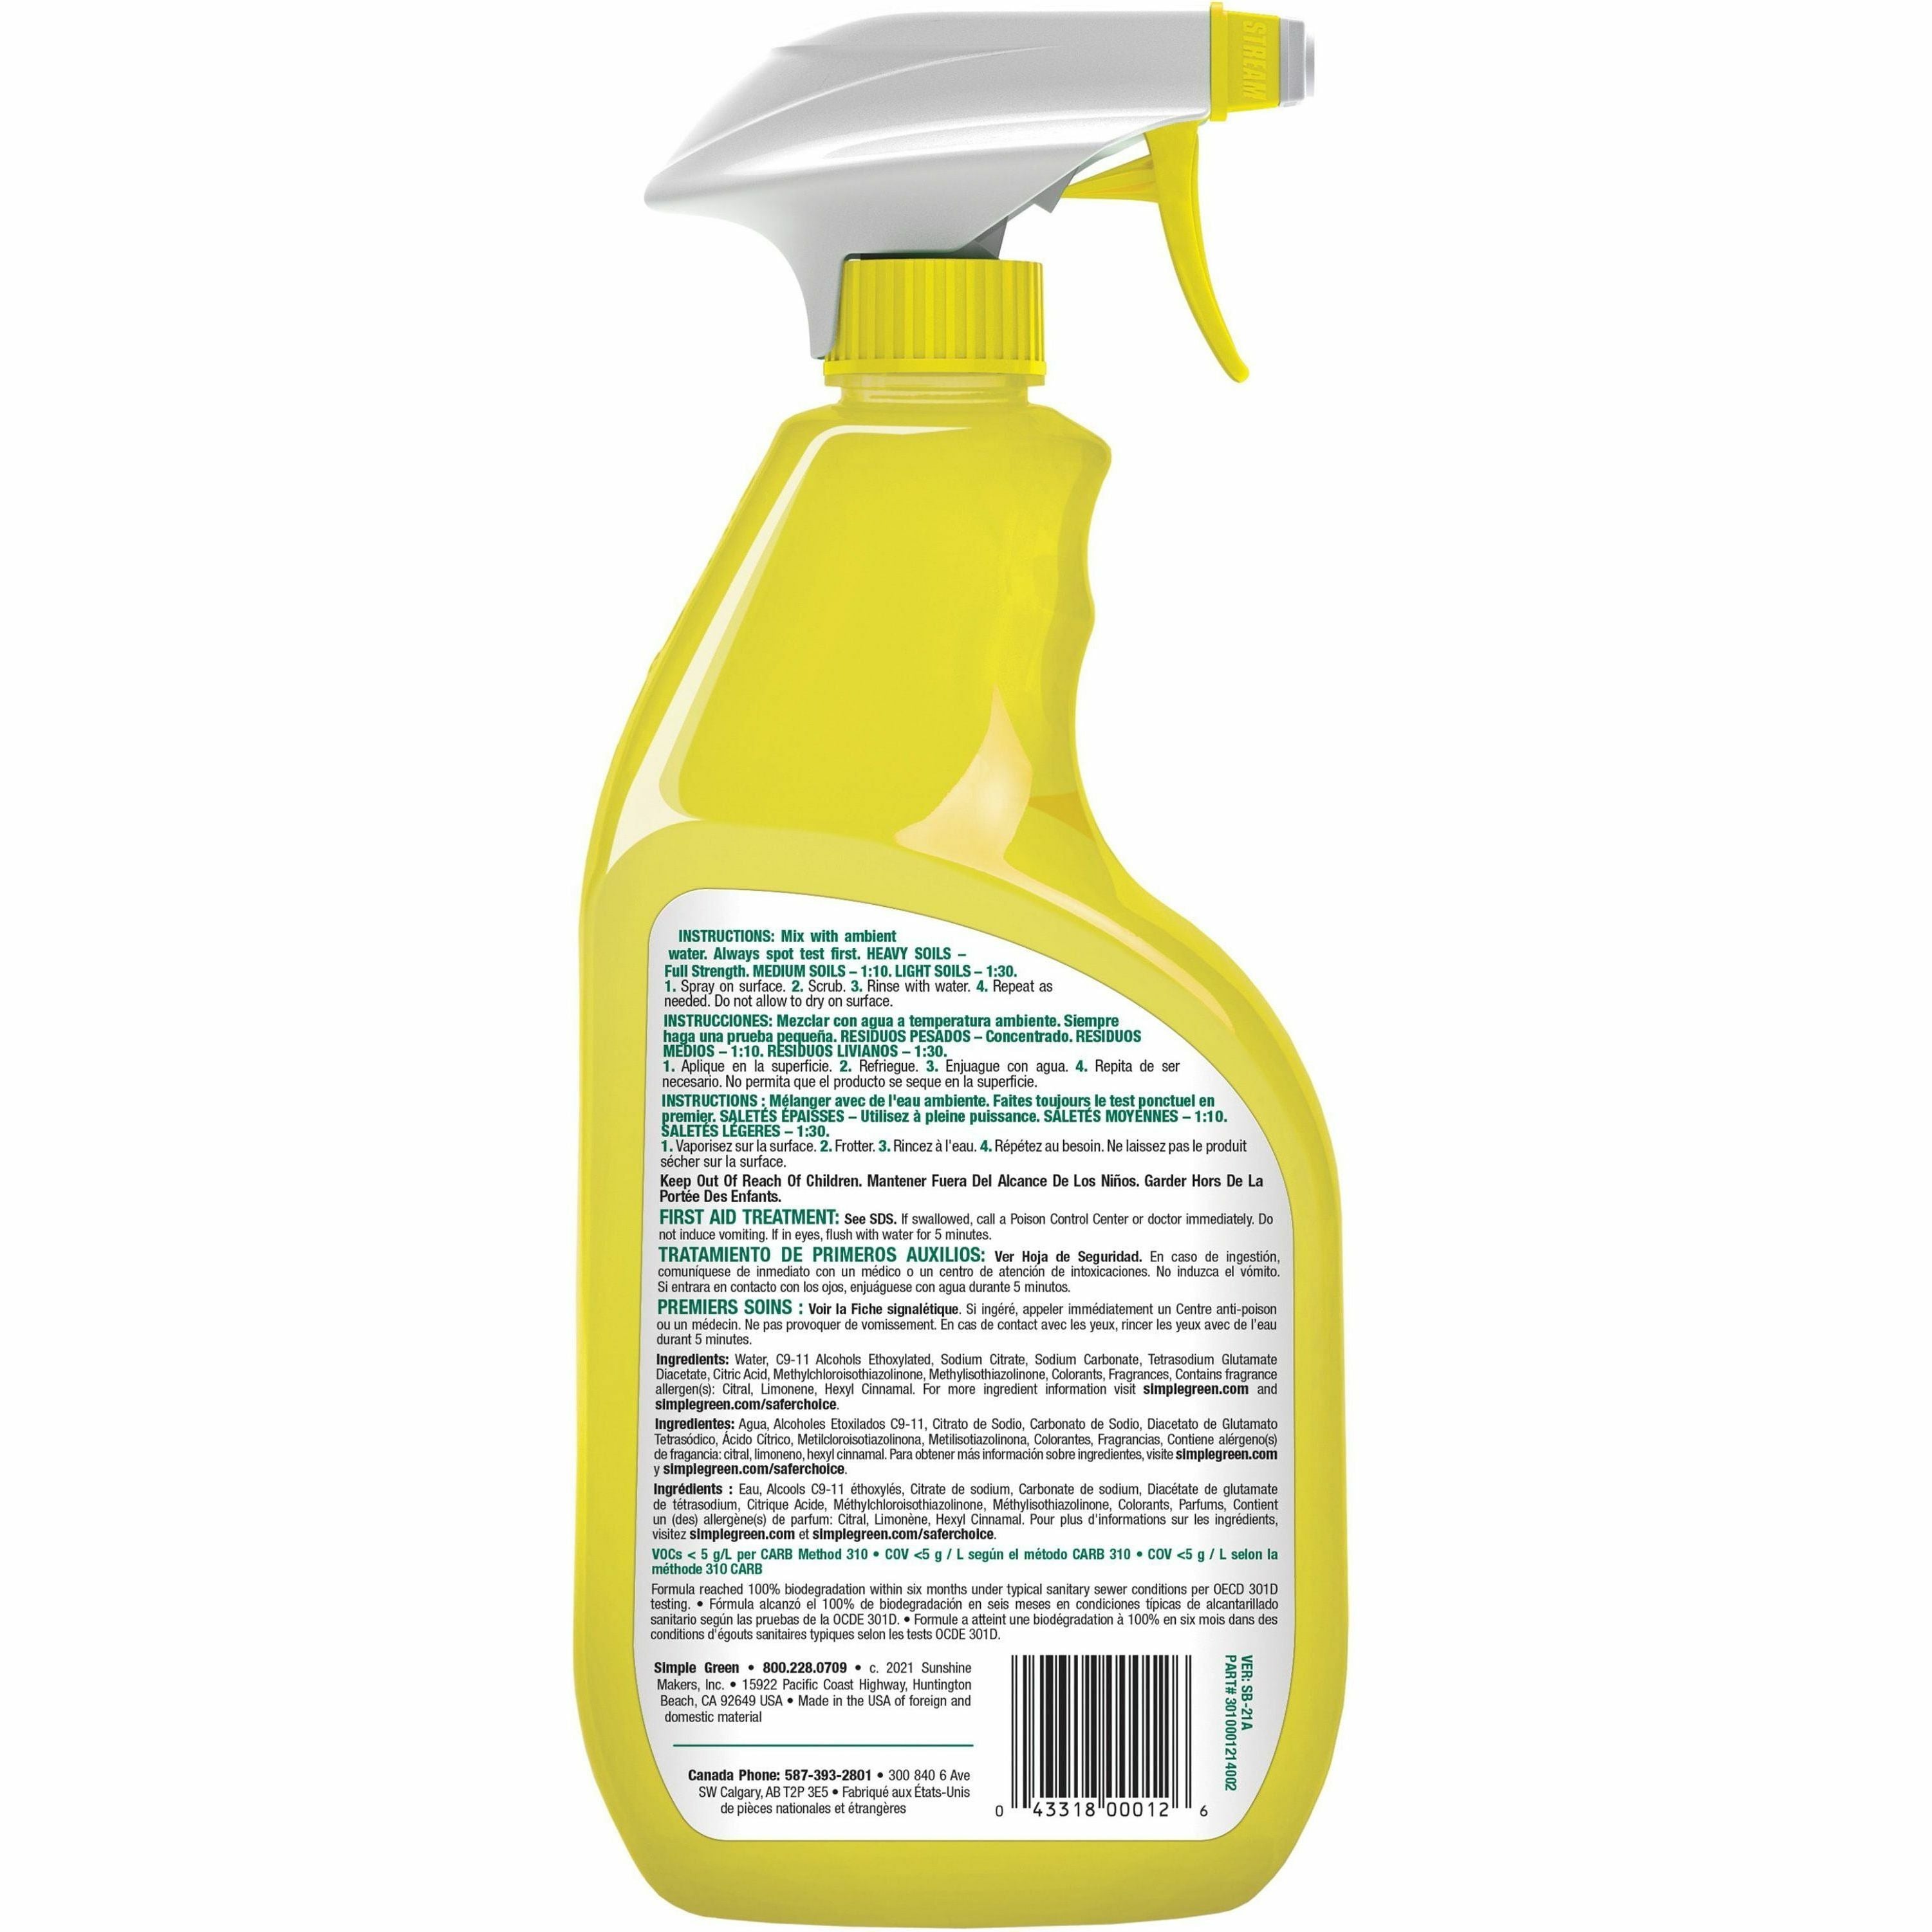 simple-green-industrial-cleaner-degreaser-concentrate-24-fl-oz-08-quart-lemon-scent-12-carton-non-toxic-butyl-free-phosphate-free-non-abrasive-non-corrosive-deodorize-lemon_smp14002ct - 2